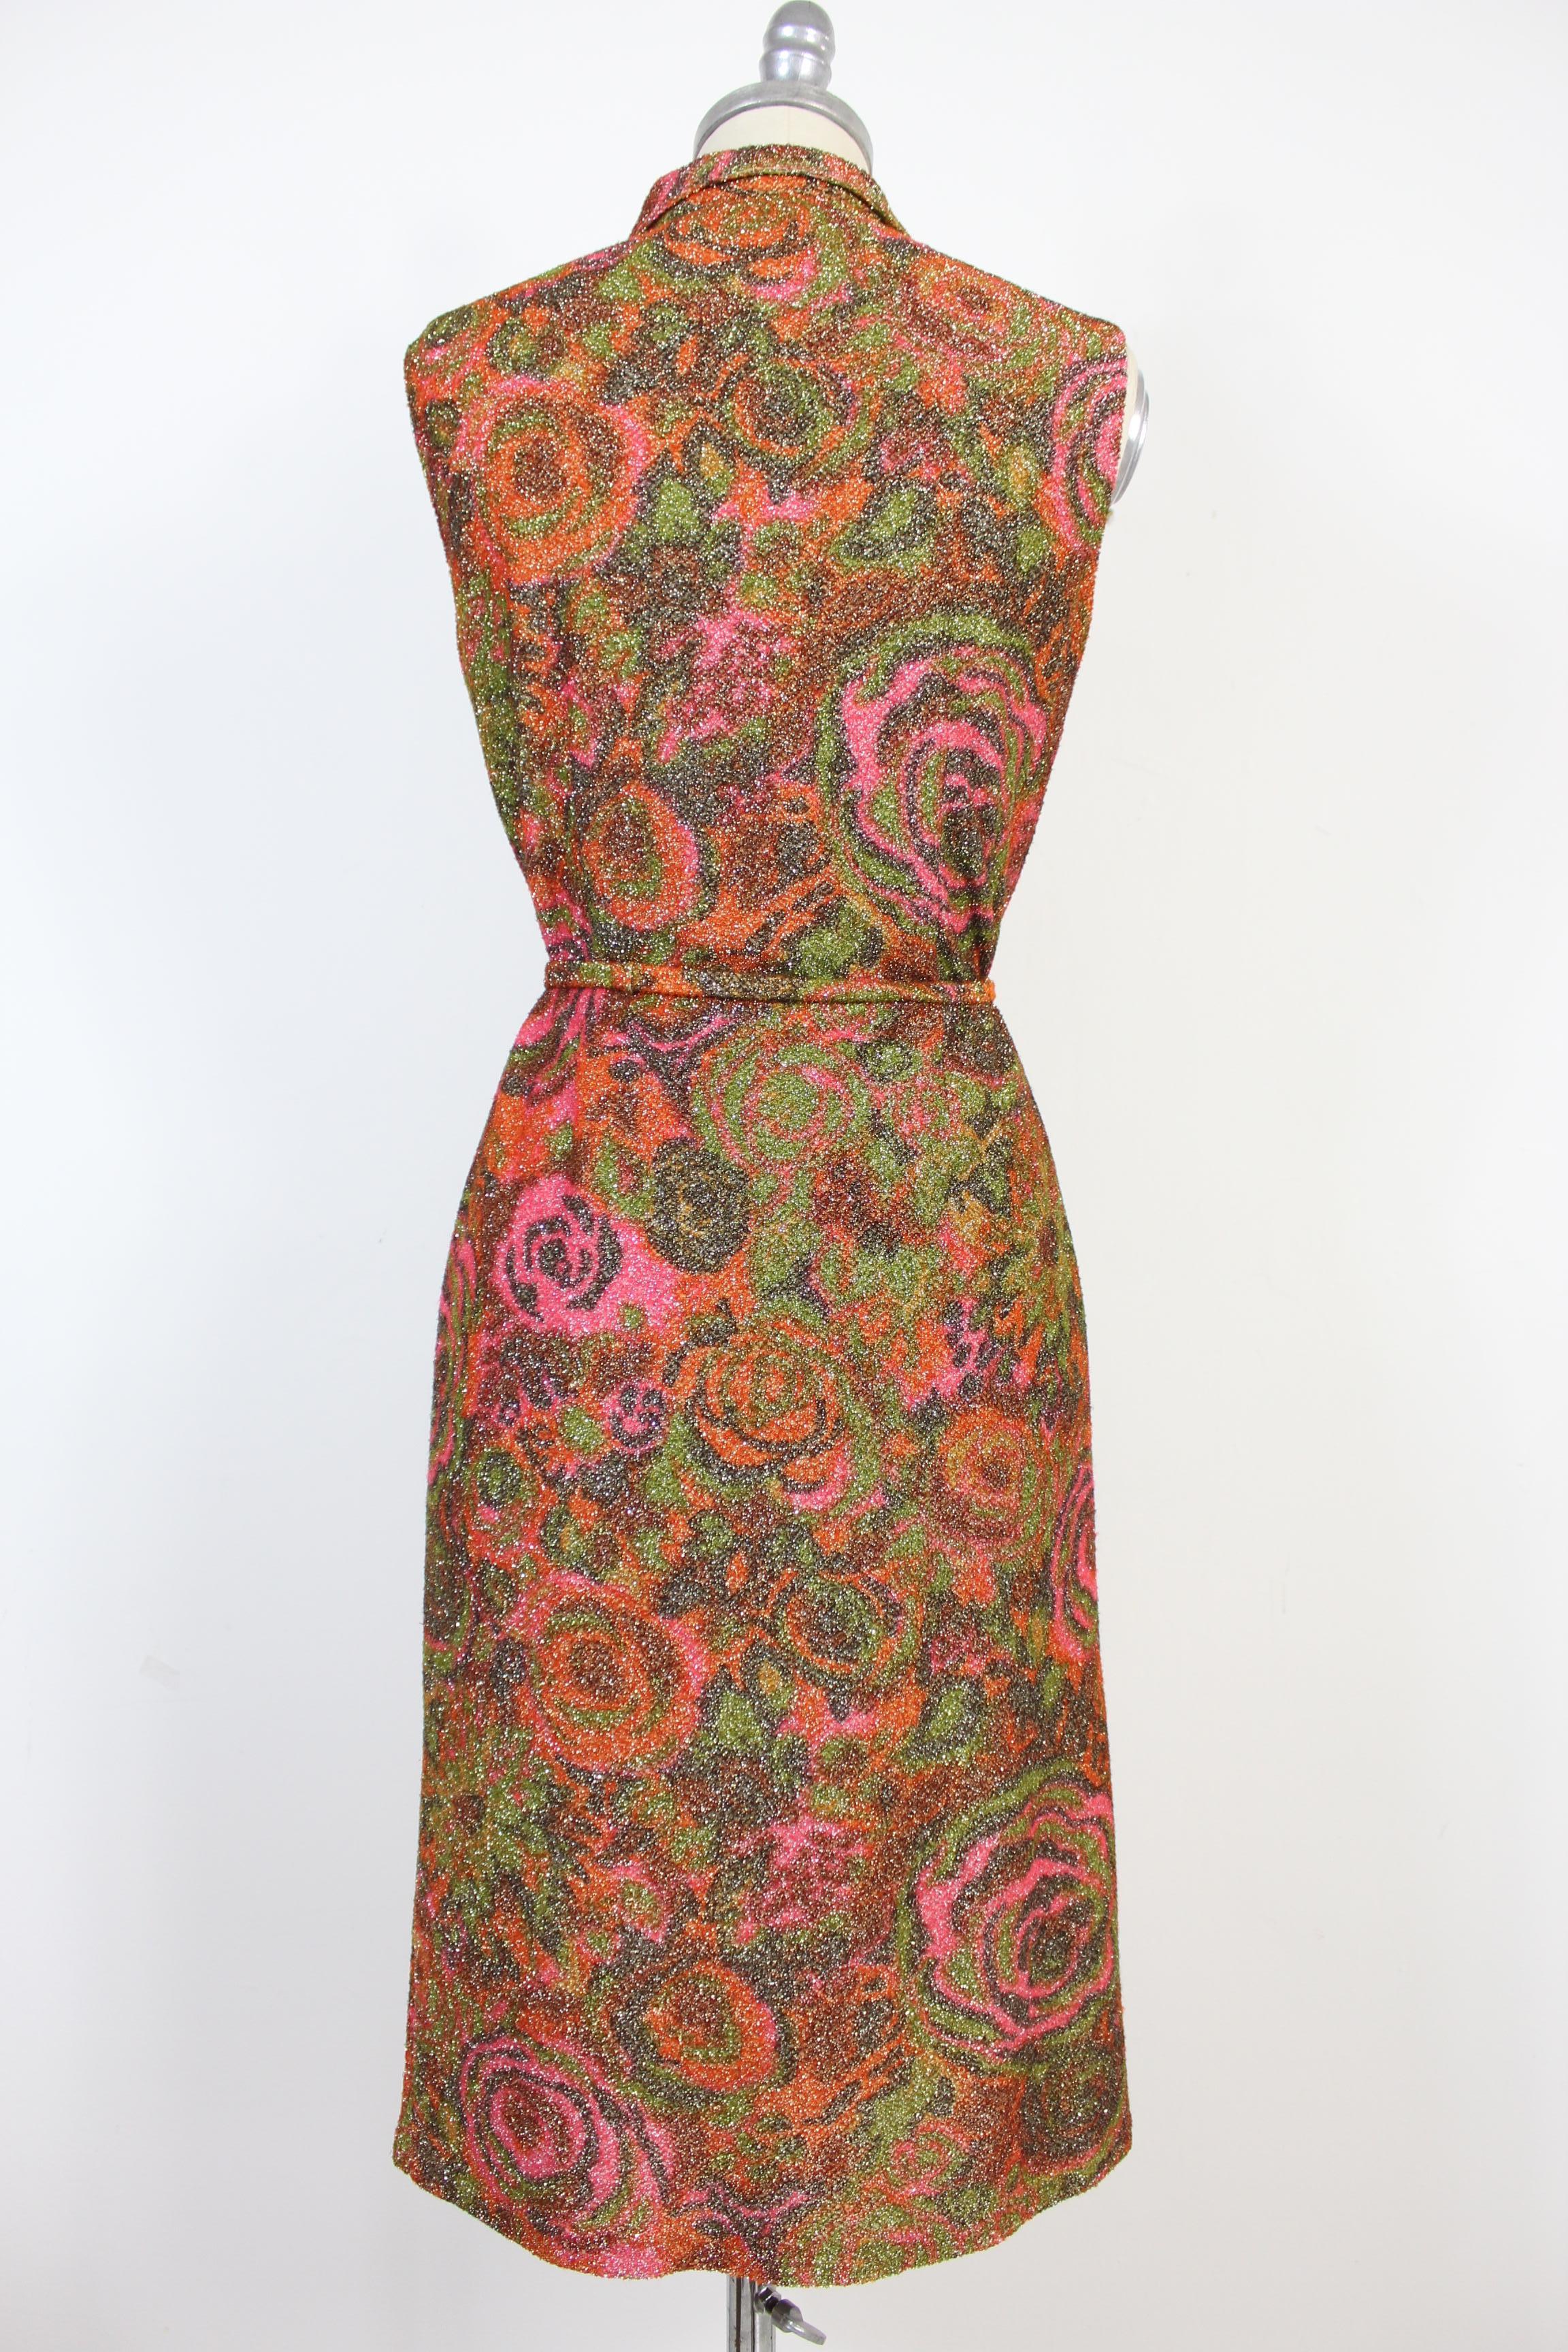 Sorelle Fontana vintage lamè dress 1960s. Composition wool, floral theme. Museale rare dress. Collar with buttons covered in lamè wool. Waist belt. Sleeveless party cocktail dress. Length at the knee. Excellent vintage condition.

The term lamè